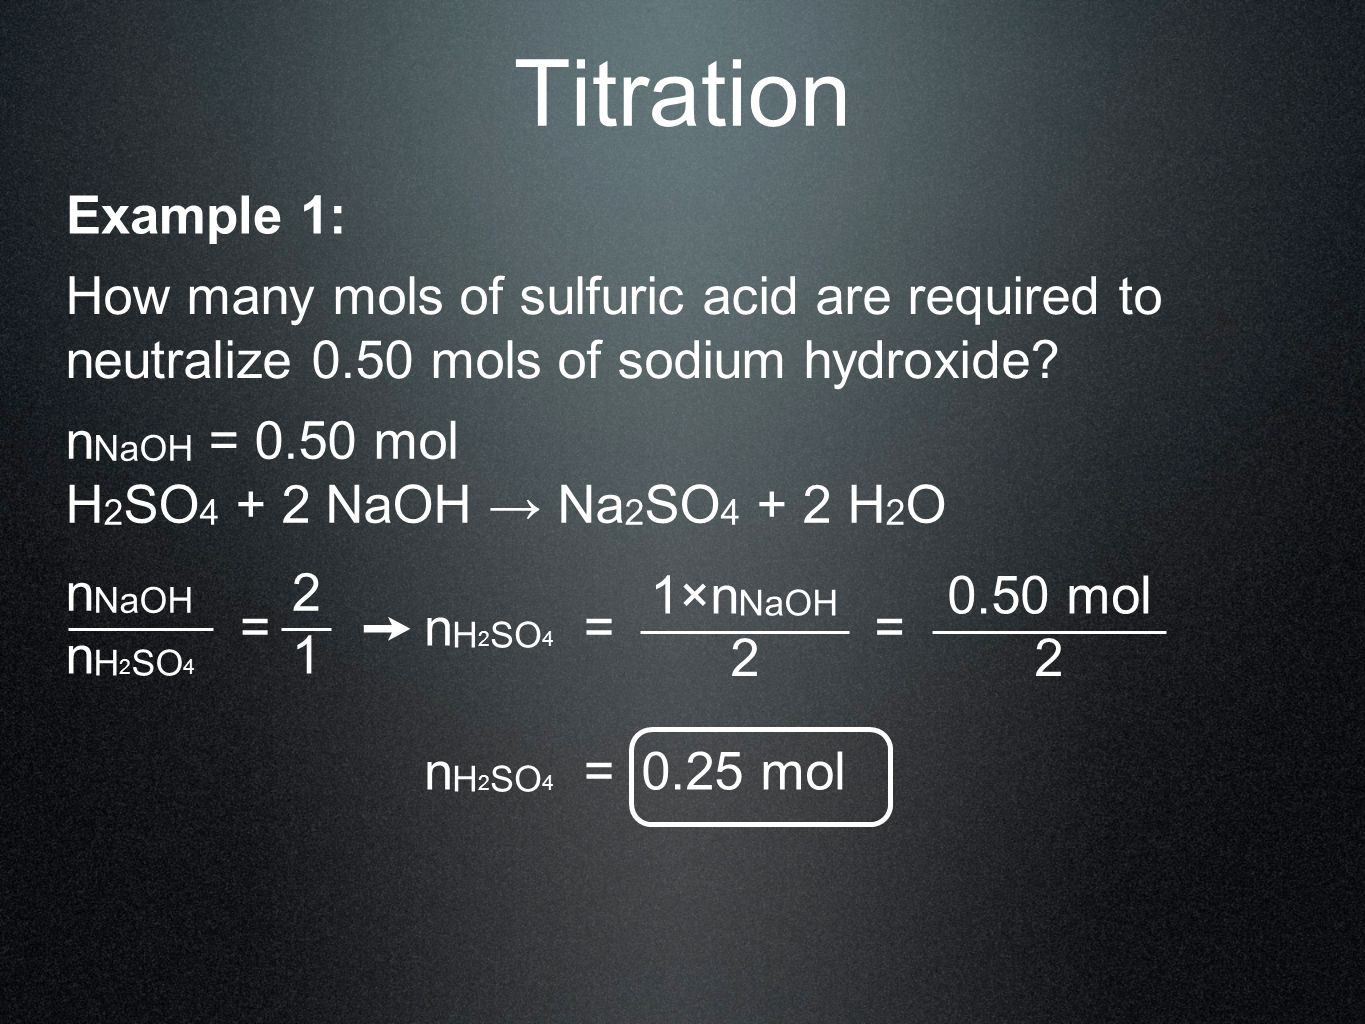 Titration Example 1: How many mols of sulfuric acid are required to neutralize 0.50 mols of sodium hydroxide